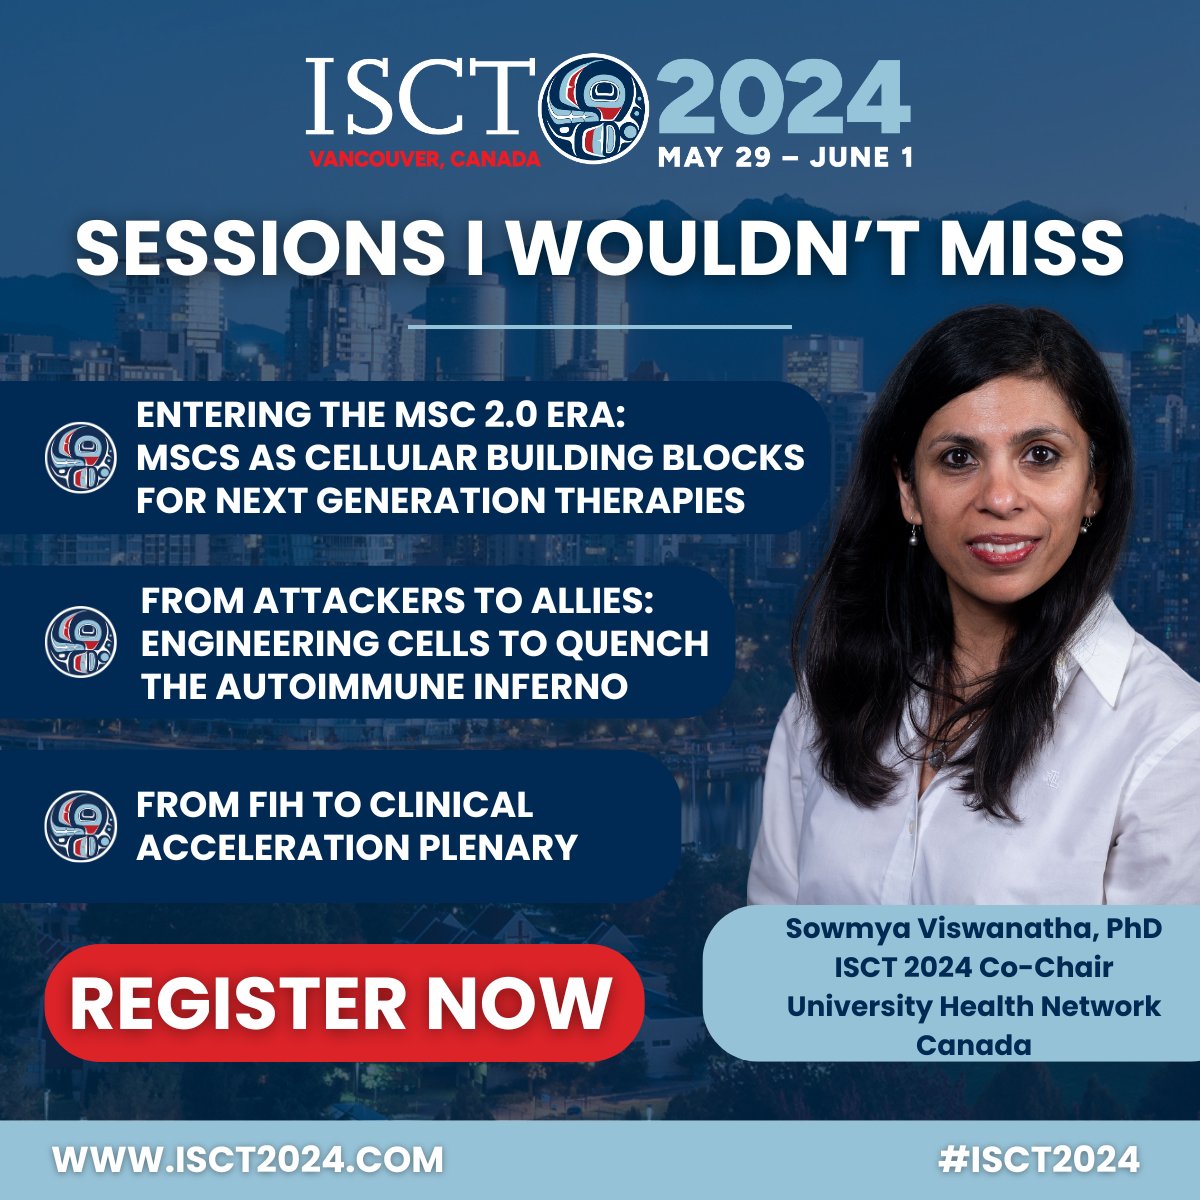 Join us at ISCT 2024 Vancouver and be a part of the cutting-edge discussions shaping the future of cell and gene therapy. Don't miss out on these must-attend sessions handpicked by meeting Co-Chair, Sowmya Viswanathan. Register Now: isctglobal.org/isct2024/regis… #ISCT2024